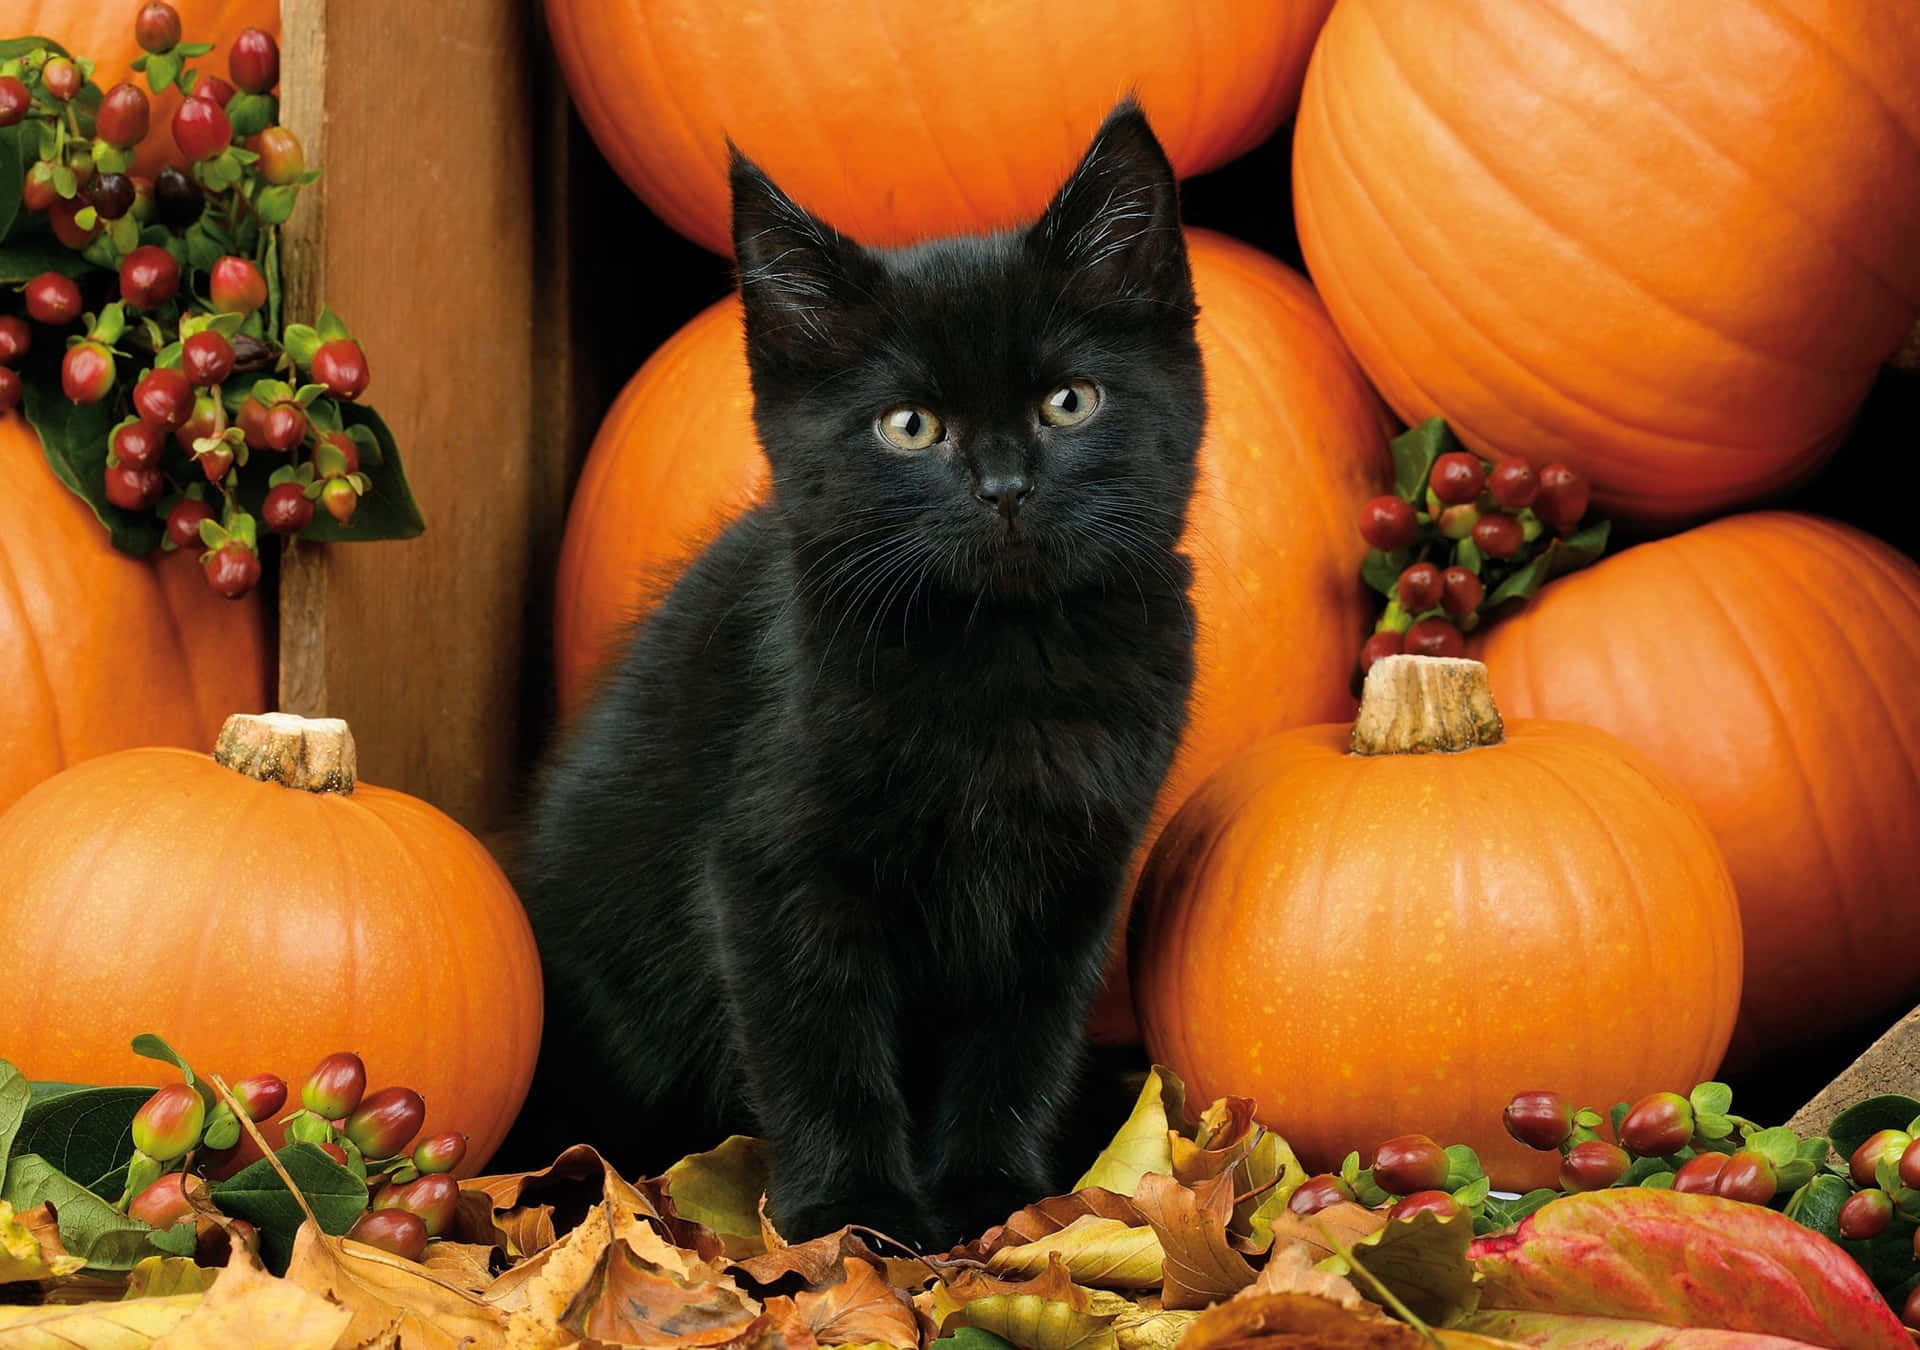 A Black Kitten Sitting In Front Of Pumpkins And Leaves